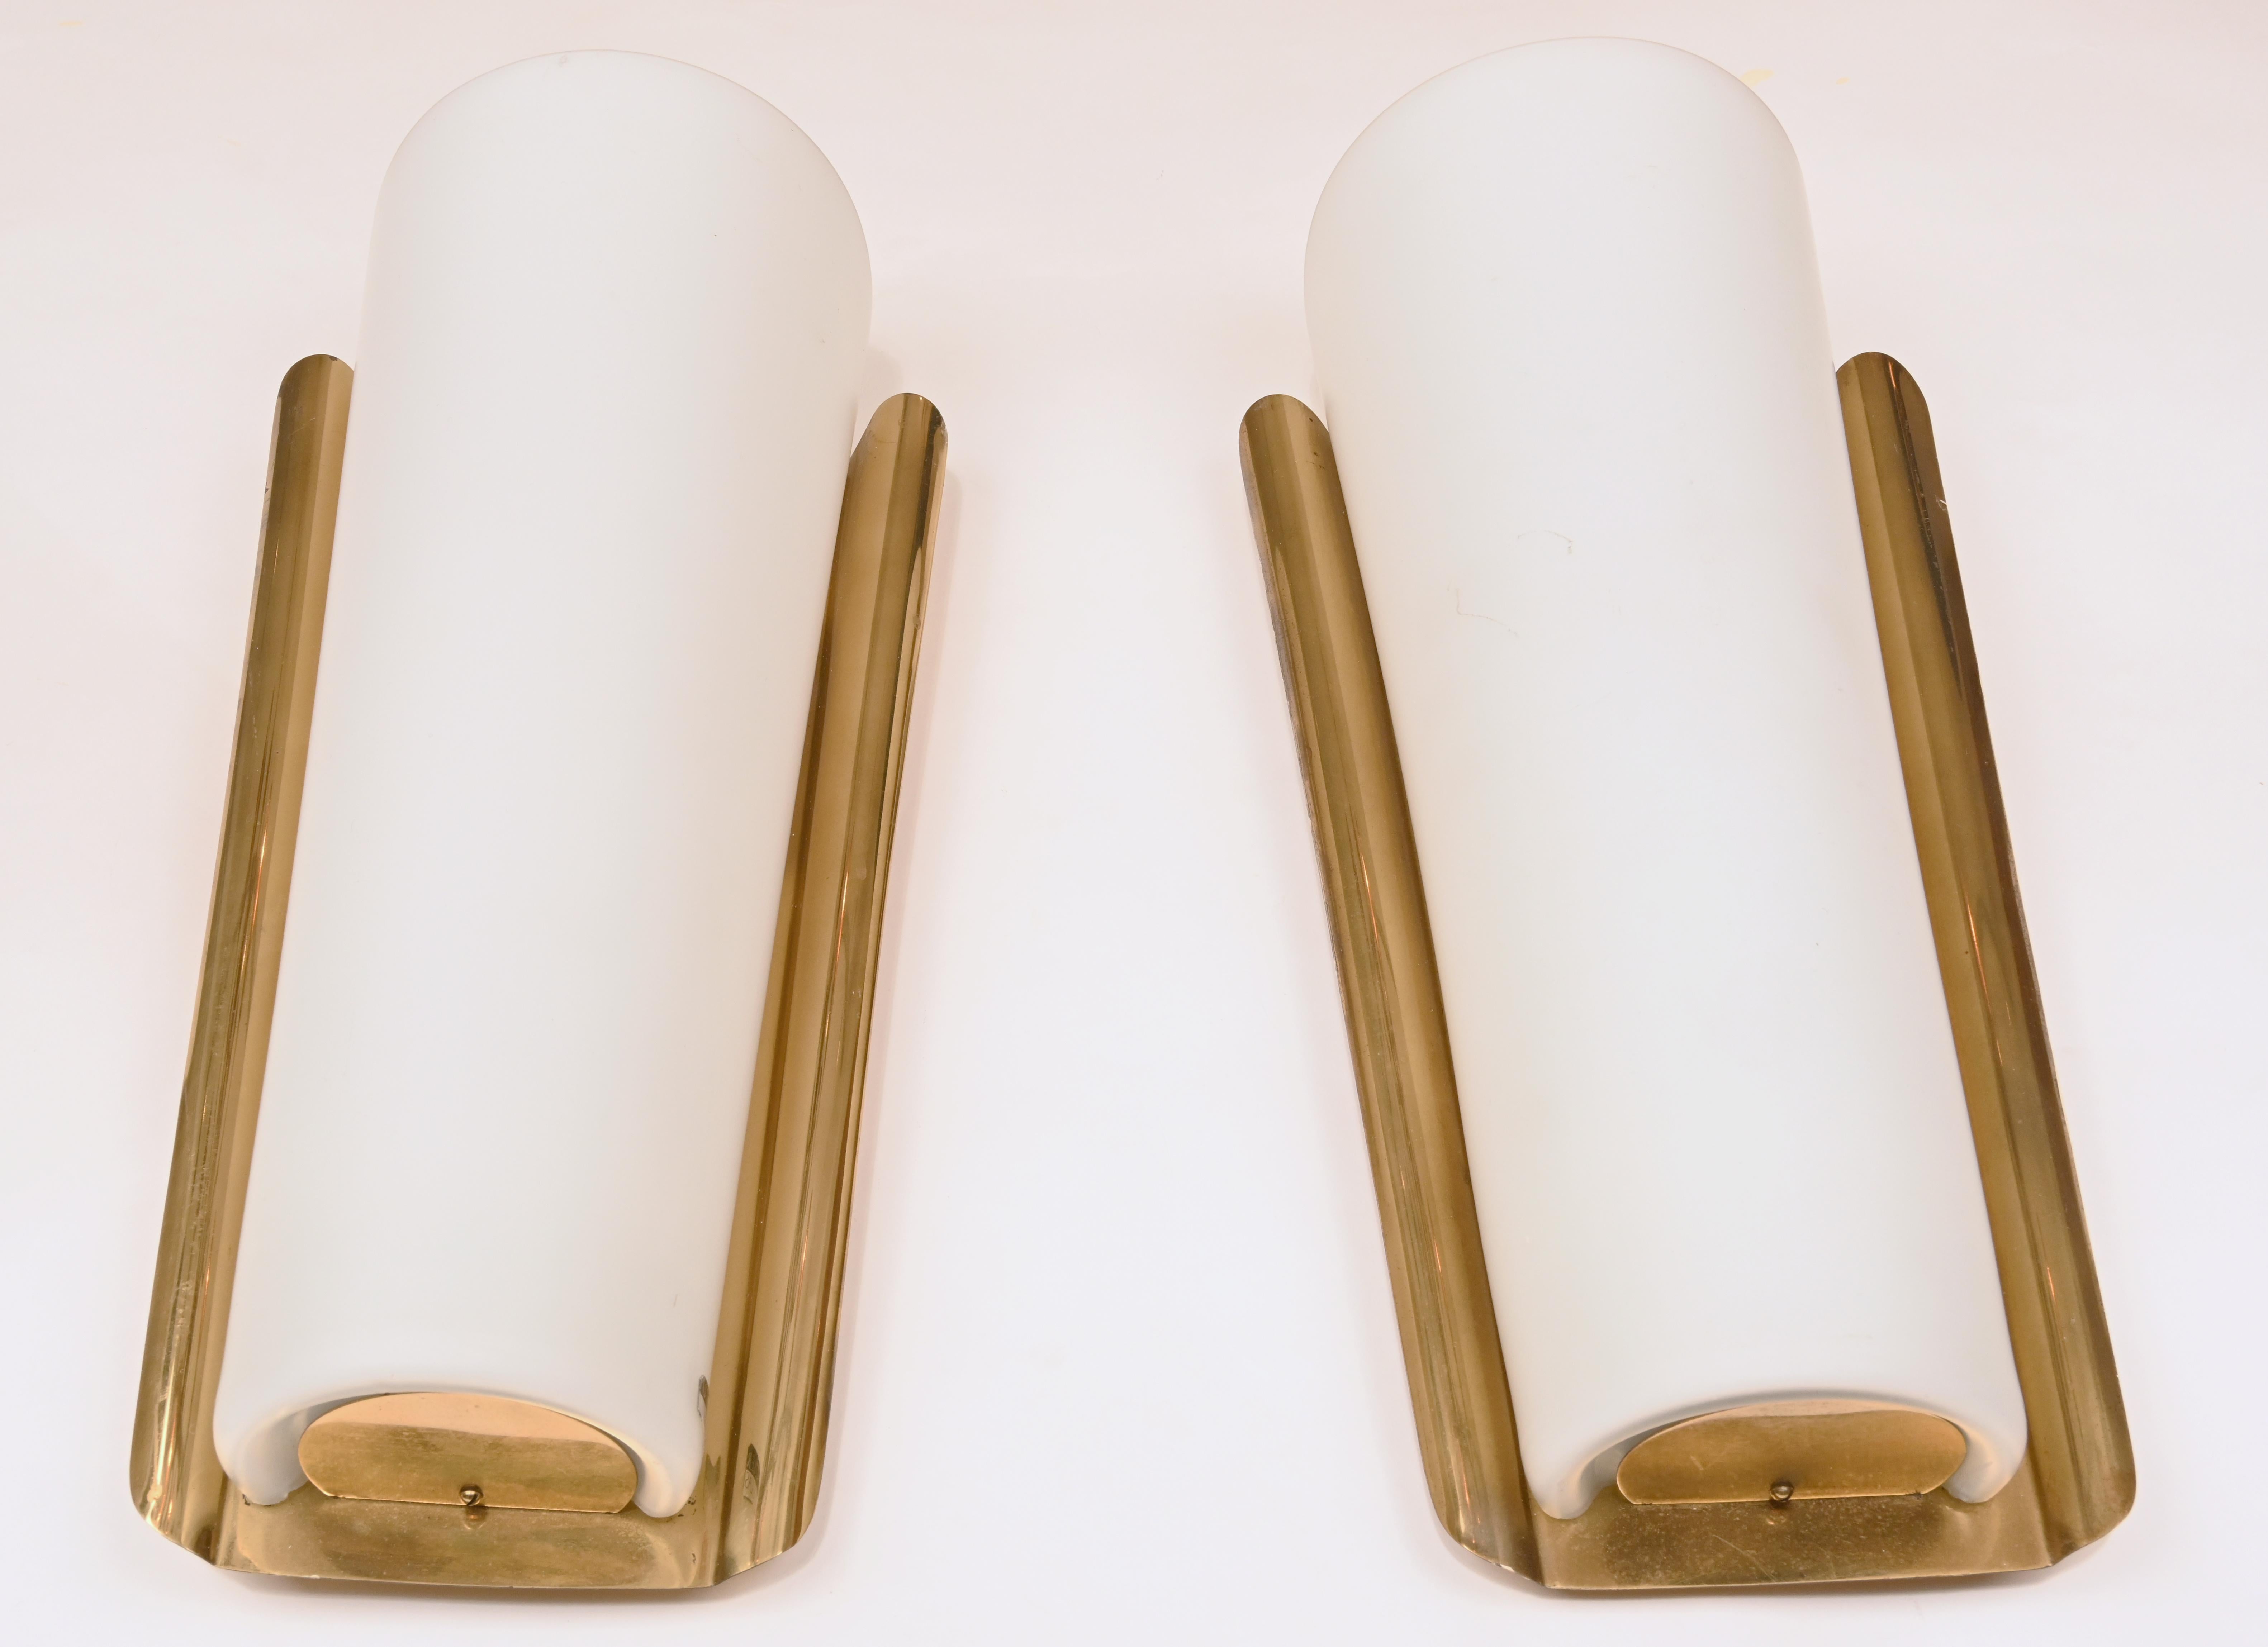 Wilhelm Wagenfeld (1900-1990) for Peill and Putzler, three wall sconces/lamps, opal glass, brass, 1960s, Germany. Set consisting of three wall lights, each with a funnel-shaped brass bracket and an opal glass cover that opens upwards, with two